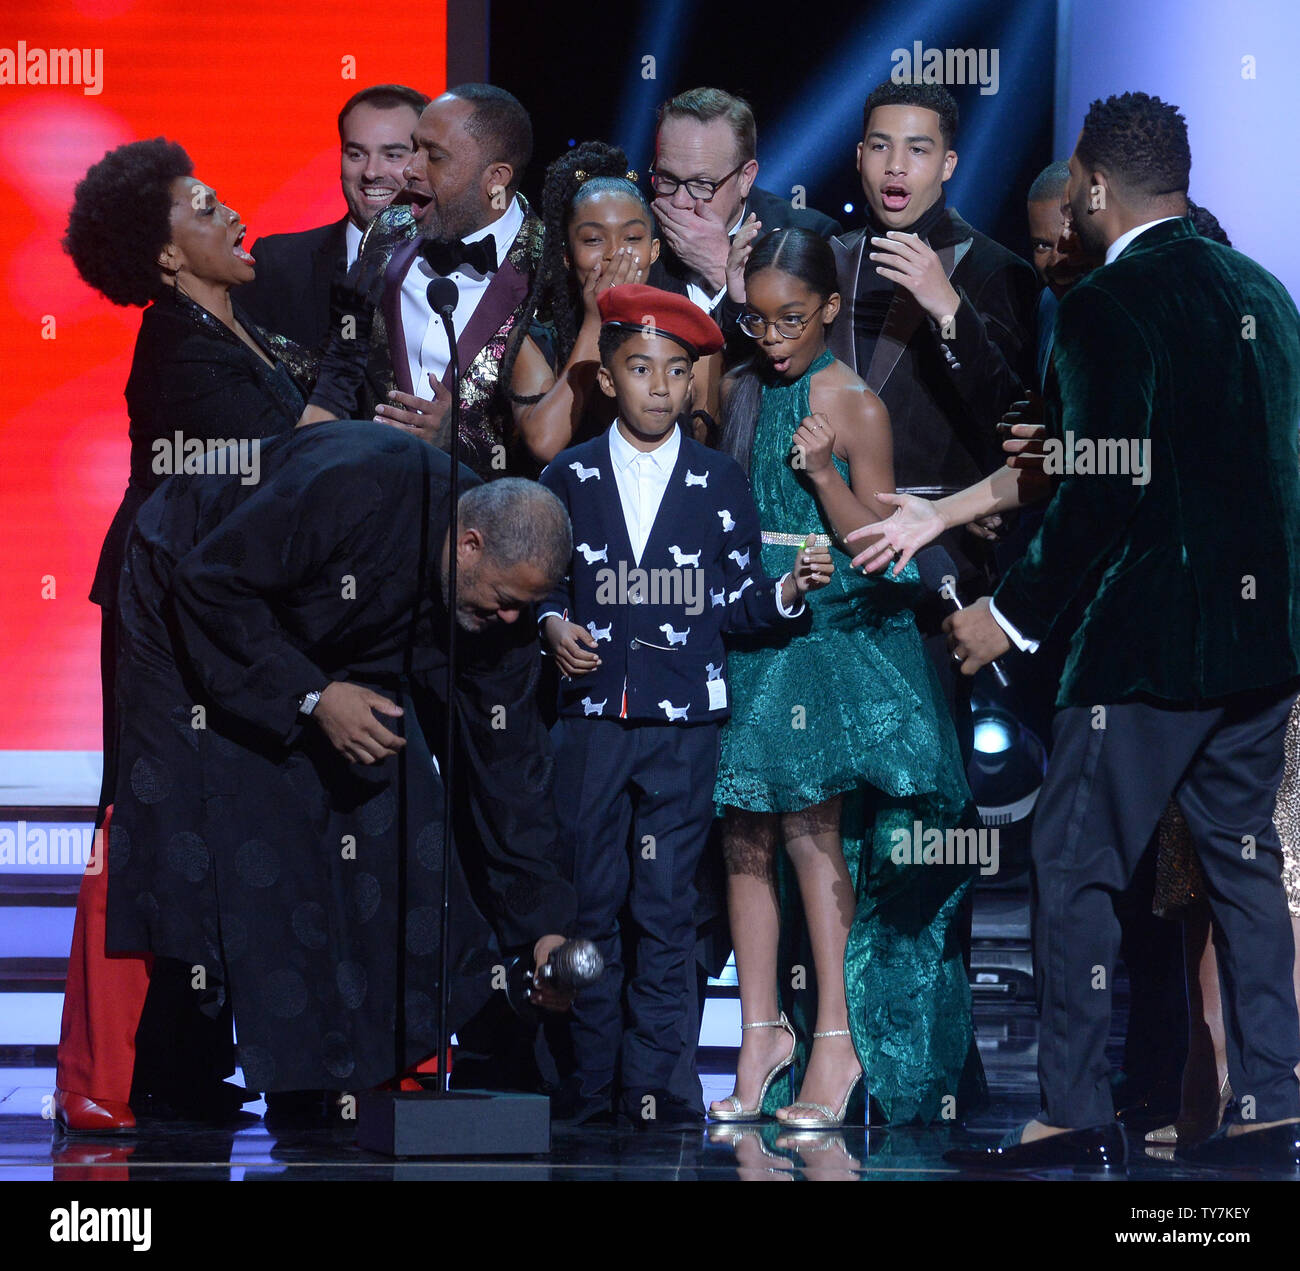 Jenifer Lewis, Kenya Barris, Miles Brown, Yara Shahidi, Marsai Martin, Marcus Scribner, and Anthony Anderson react after their trophy for the Outstanding Comedy Series award for 'black-ish' was dropped onstage during the 49th NAACP Image Awards at the Pasadena Civic Auditorium in Pasadena, California on January 15, 2018. The NAACP Image Awards celebrates the accomplishments of people of color in the fields of television, music, literature and film and also honors individuals or groups who promote social justice through creative endeavors.during the 49th NAACP Image Awards at the Pasadena Civic Stock Photo